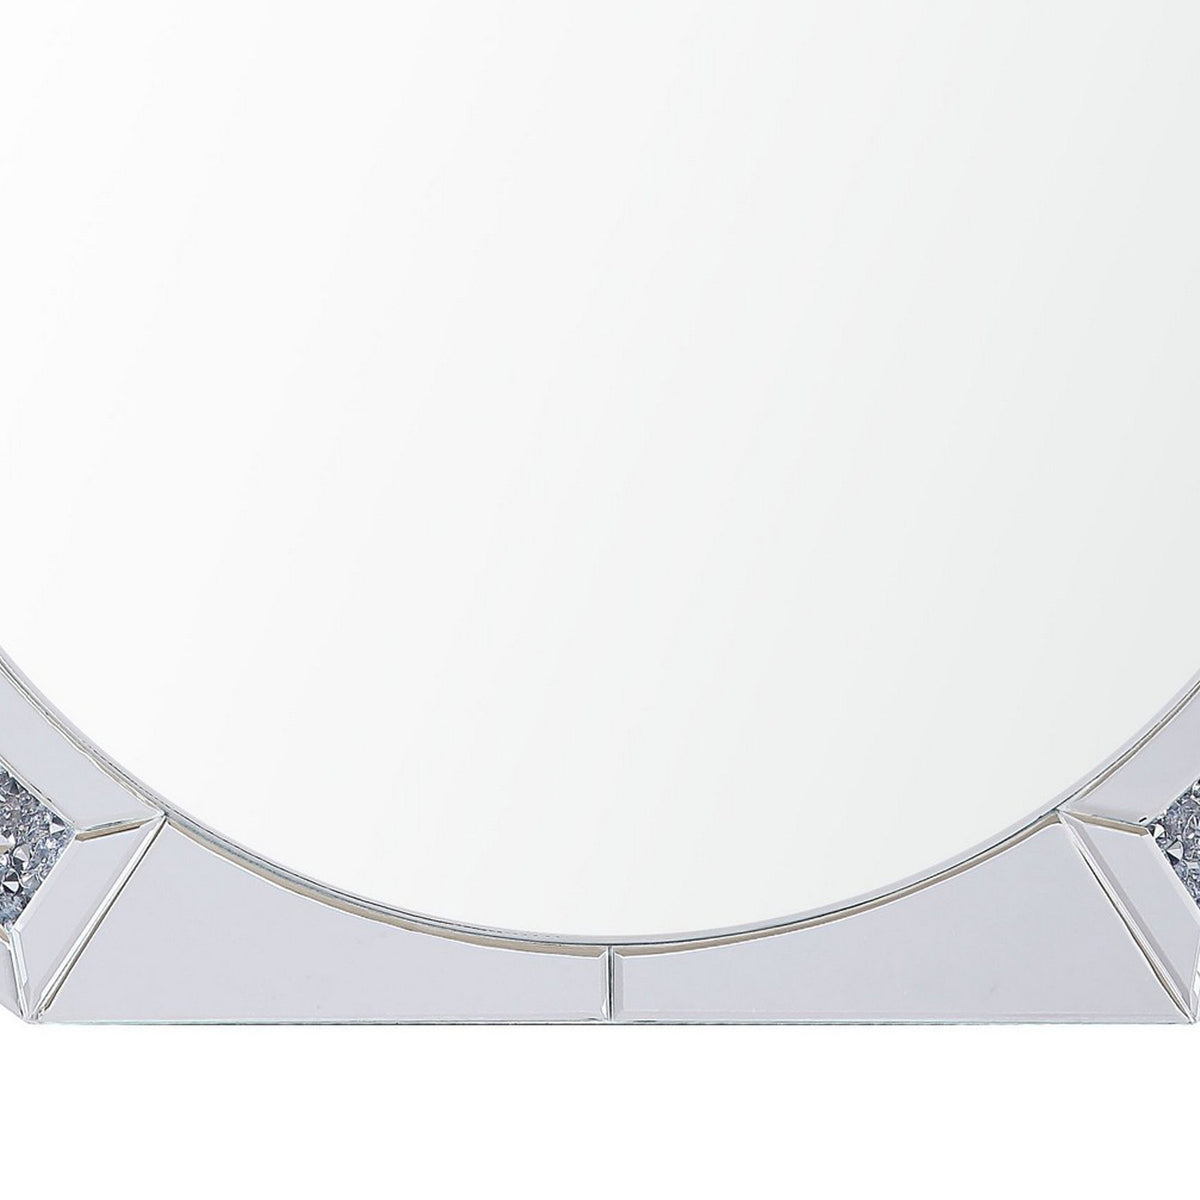 Round Mirror Panel Wall Decor with Light Function and Faux Diamond, Silver - BM225874